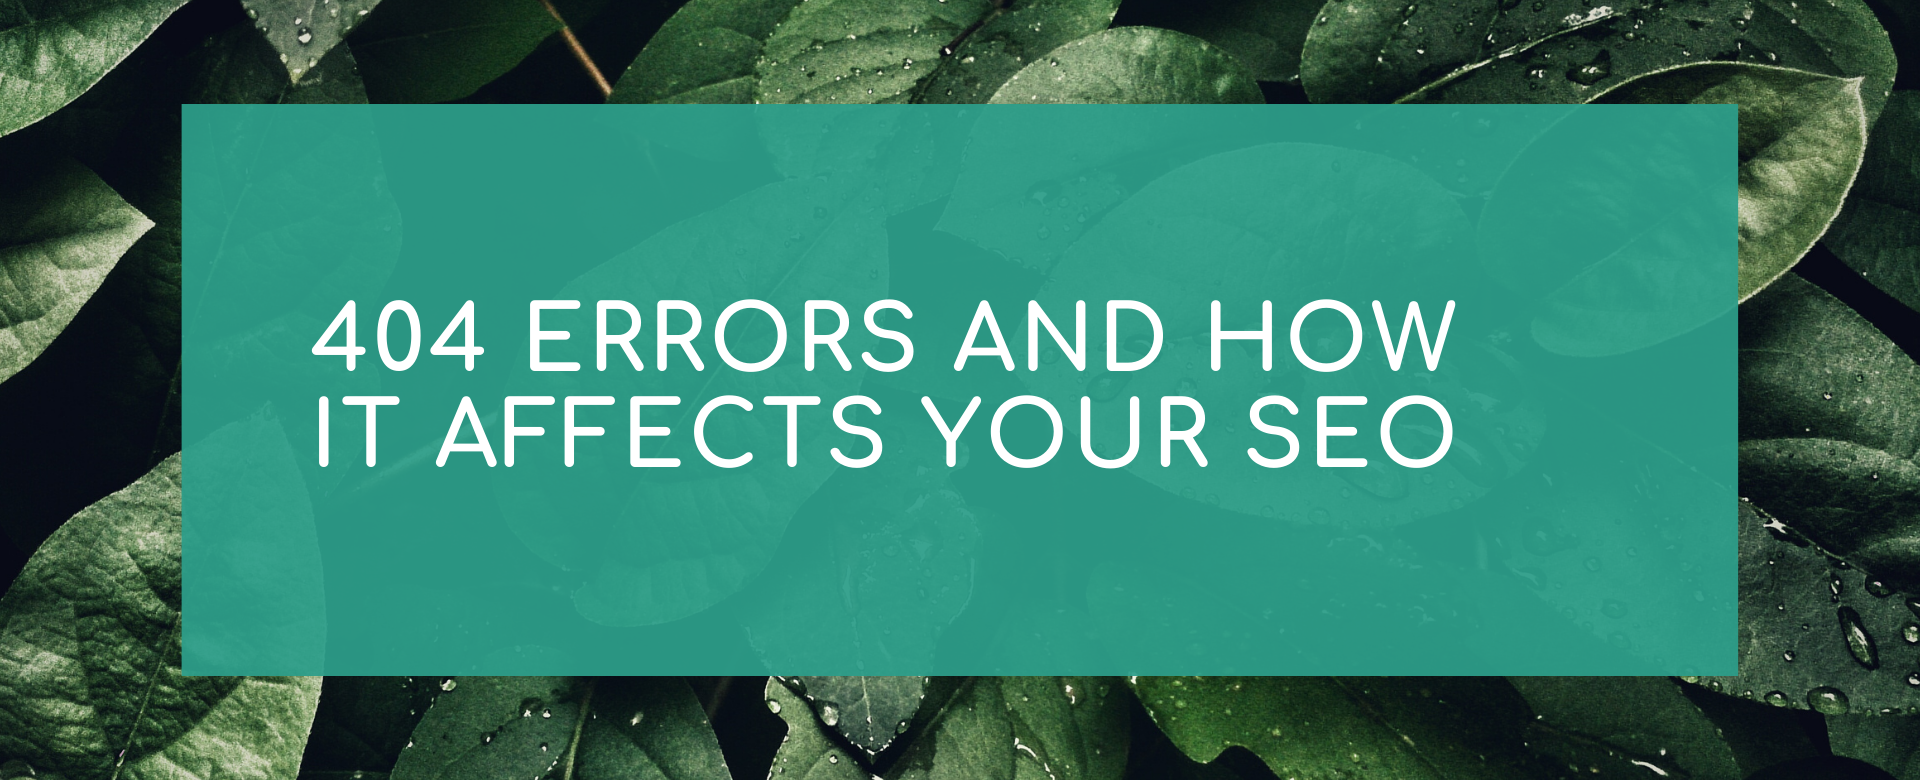 404 errors and how it affects your SEO